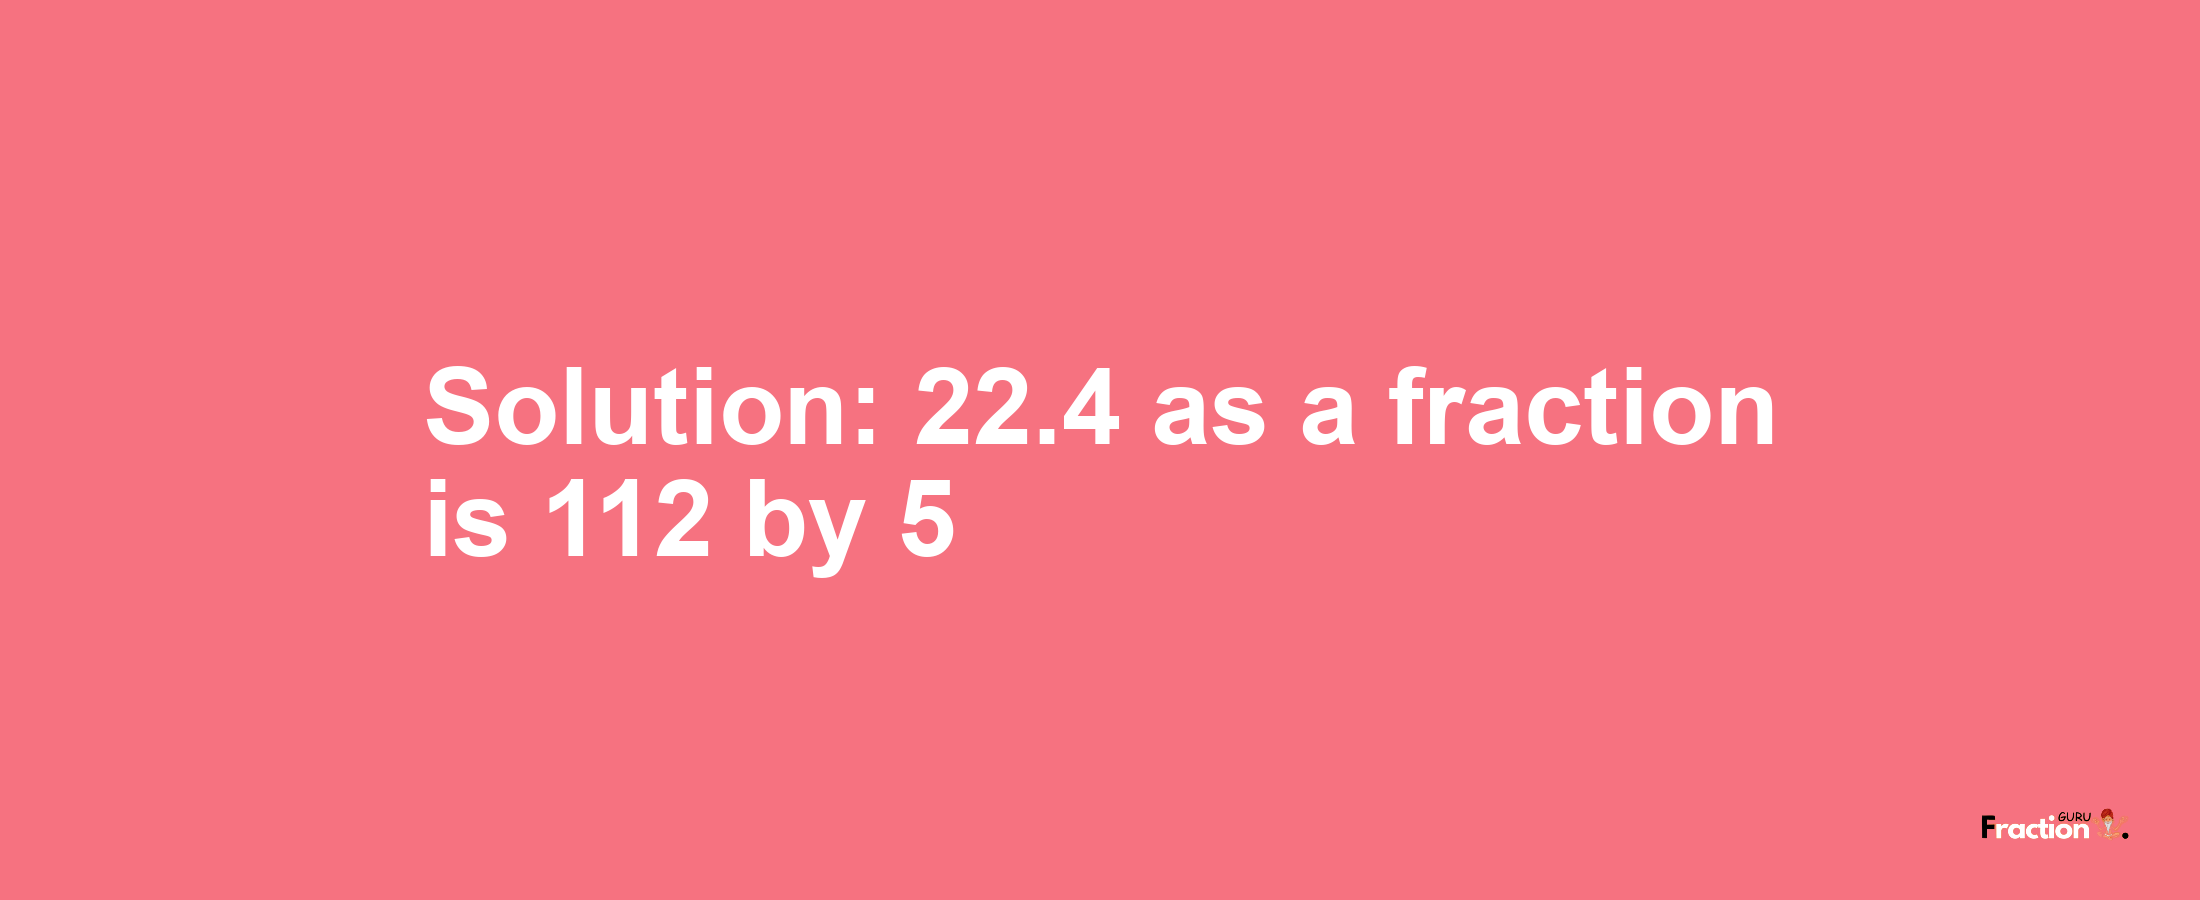 Solution:22.4 as a fraction is 112/5